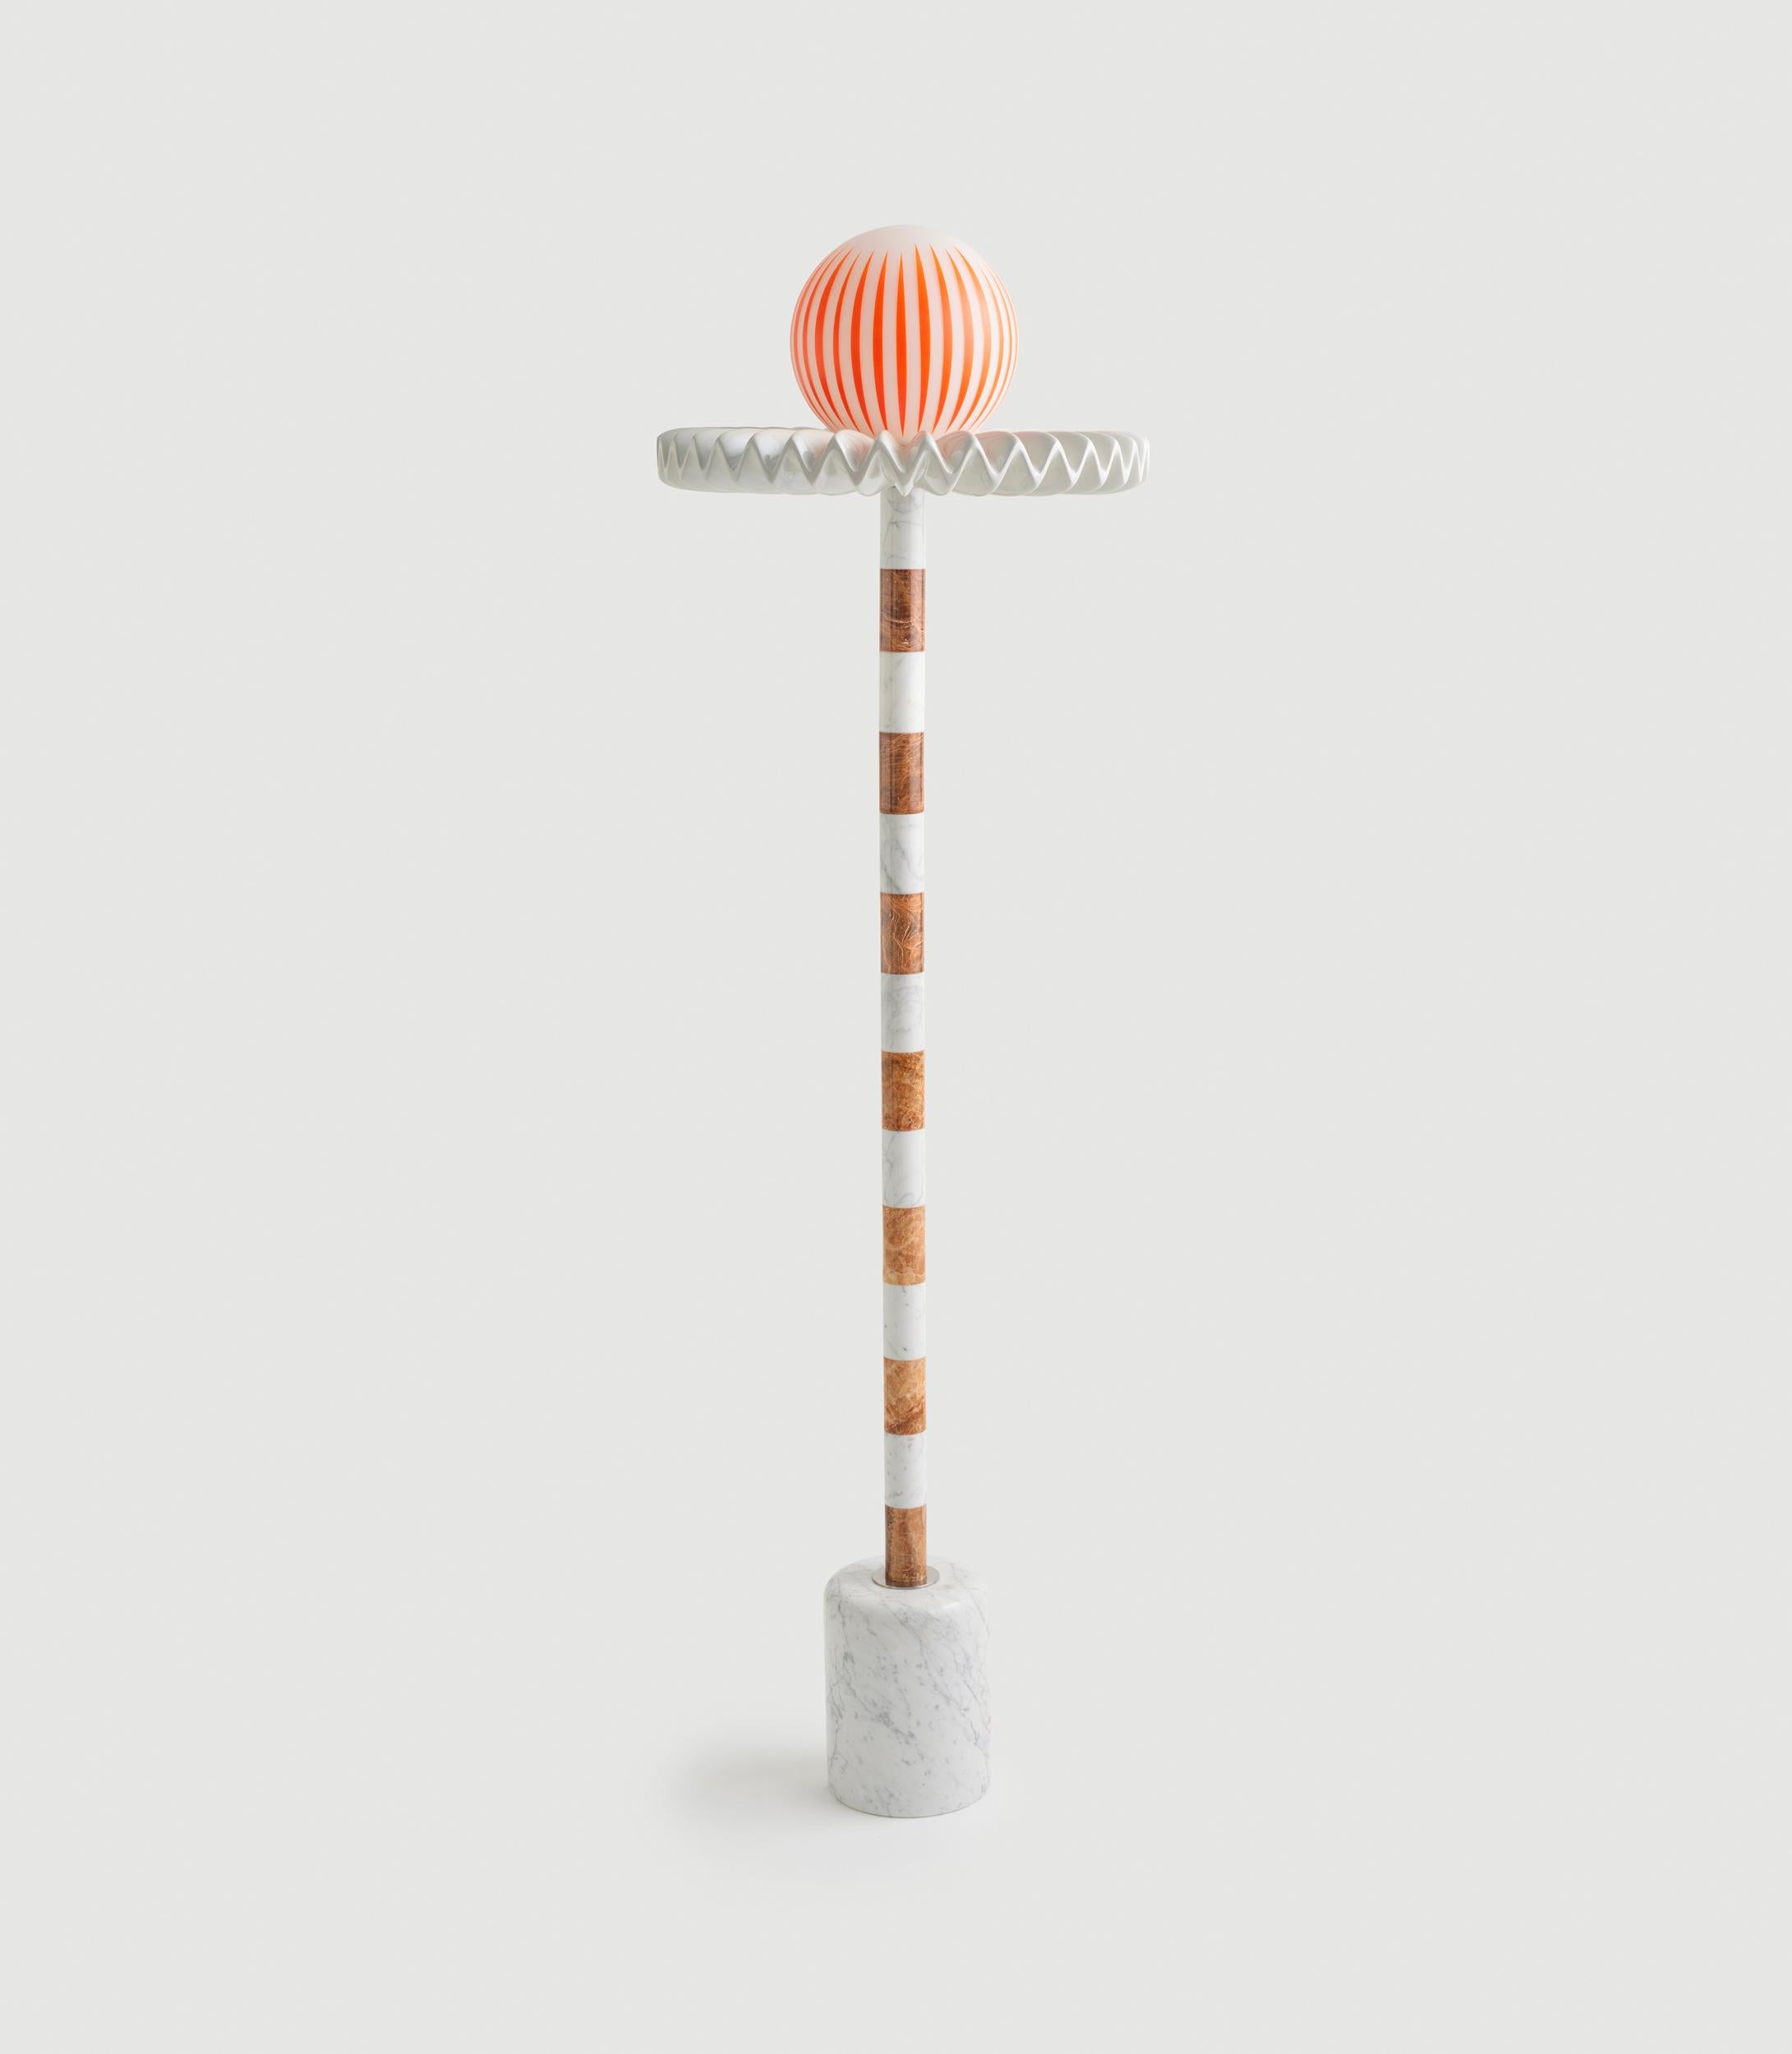 “Sare” is a floor lamp inspired by the 17th century ruff collar which was a symbol of wealth and status. It also resembles the silent clown “Pierrot” with it’s striped marble body and round glass head. Sare is handcrafted and assembled with